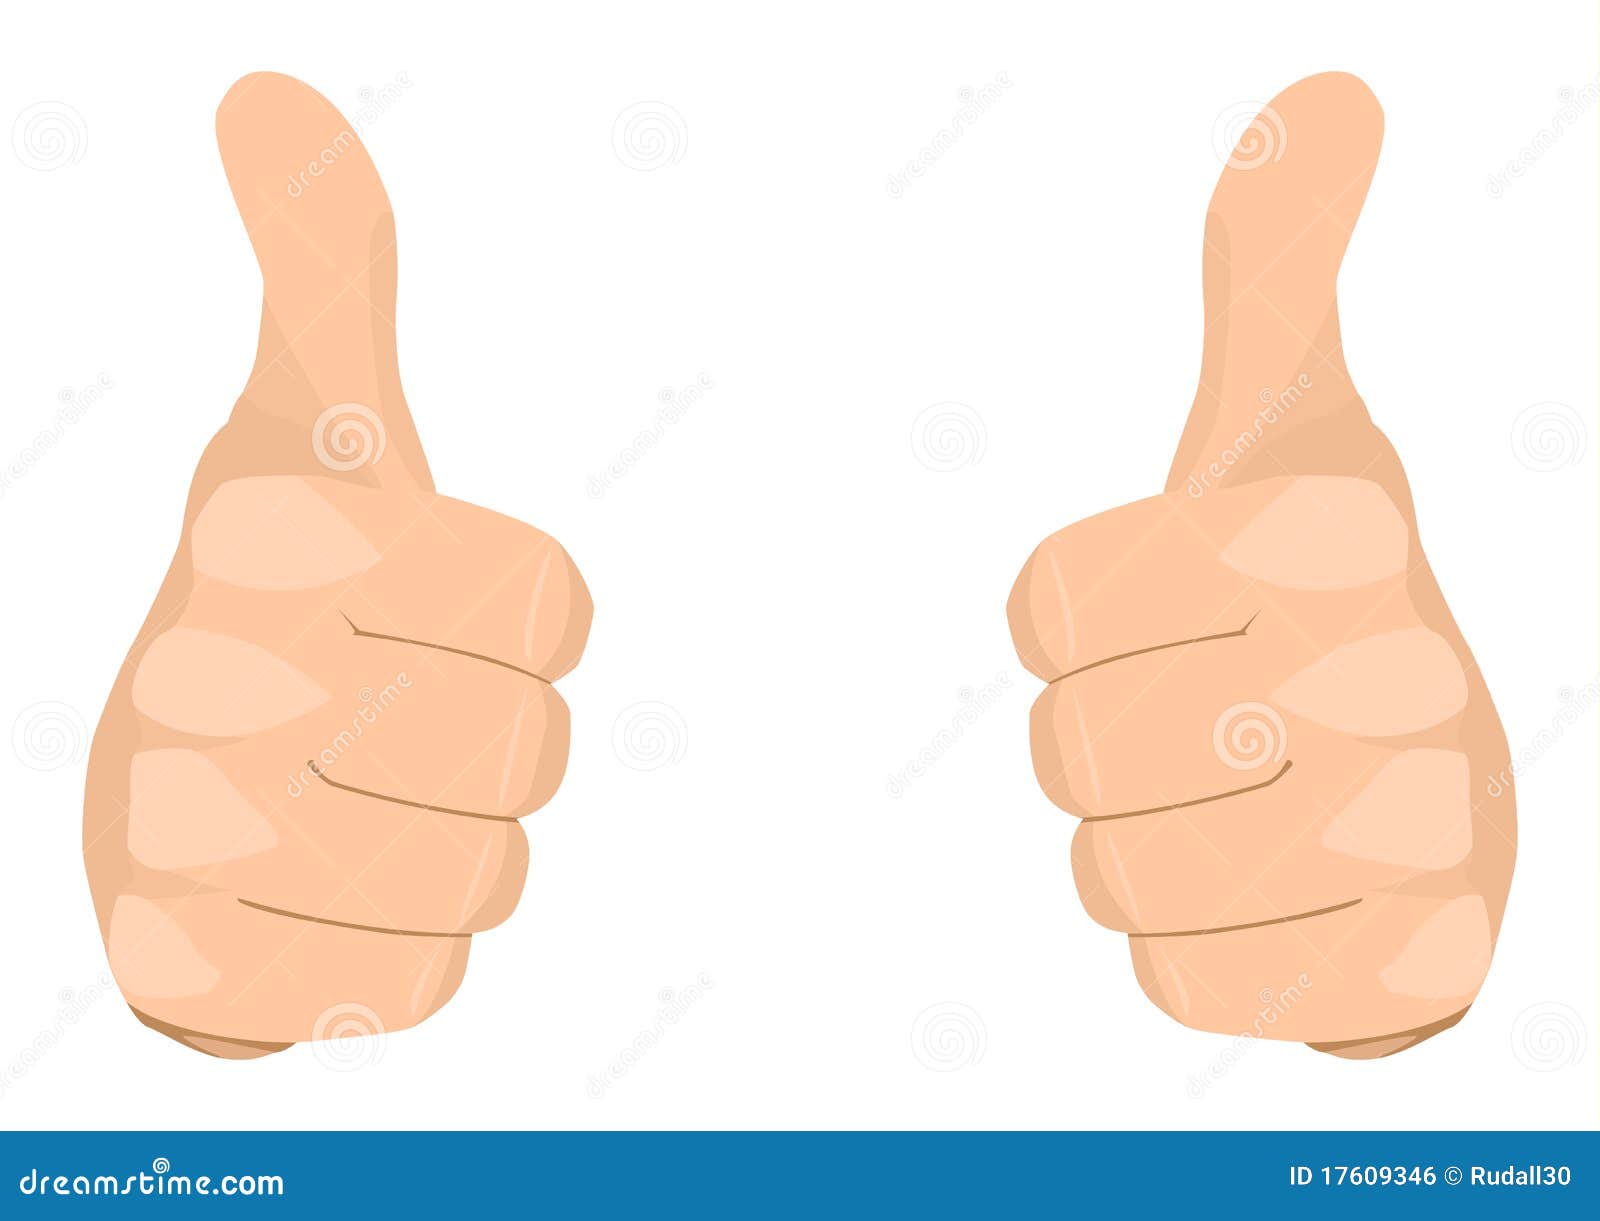 two thumbs up